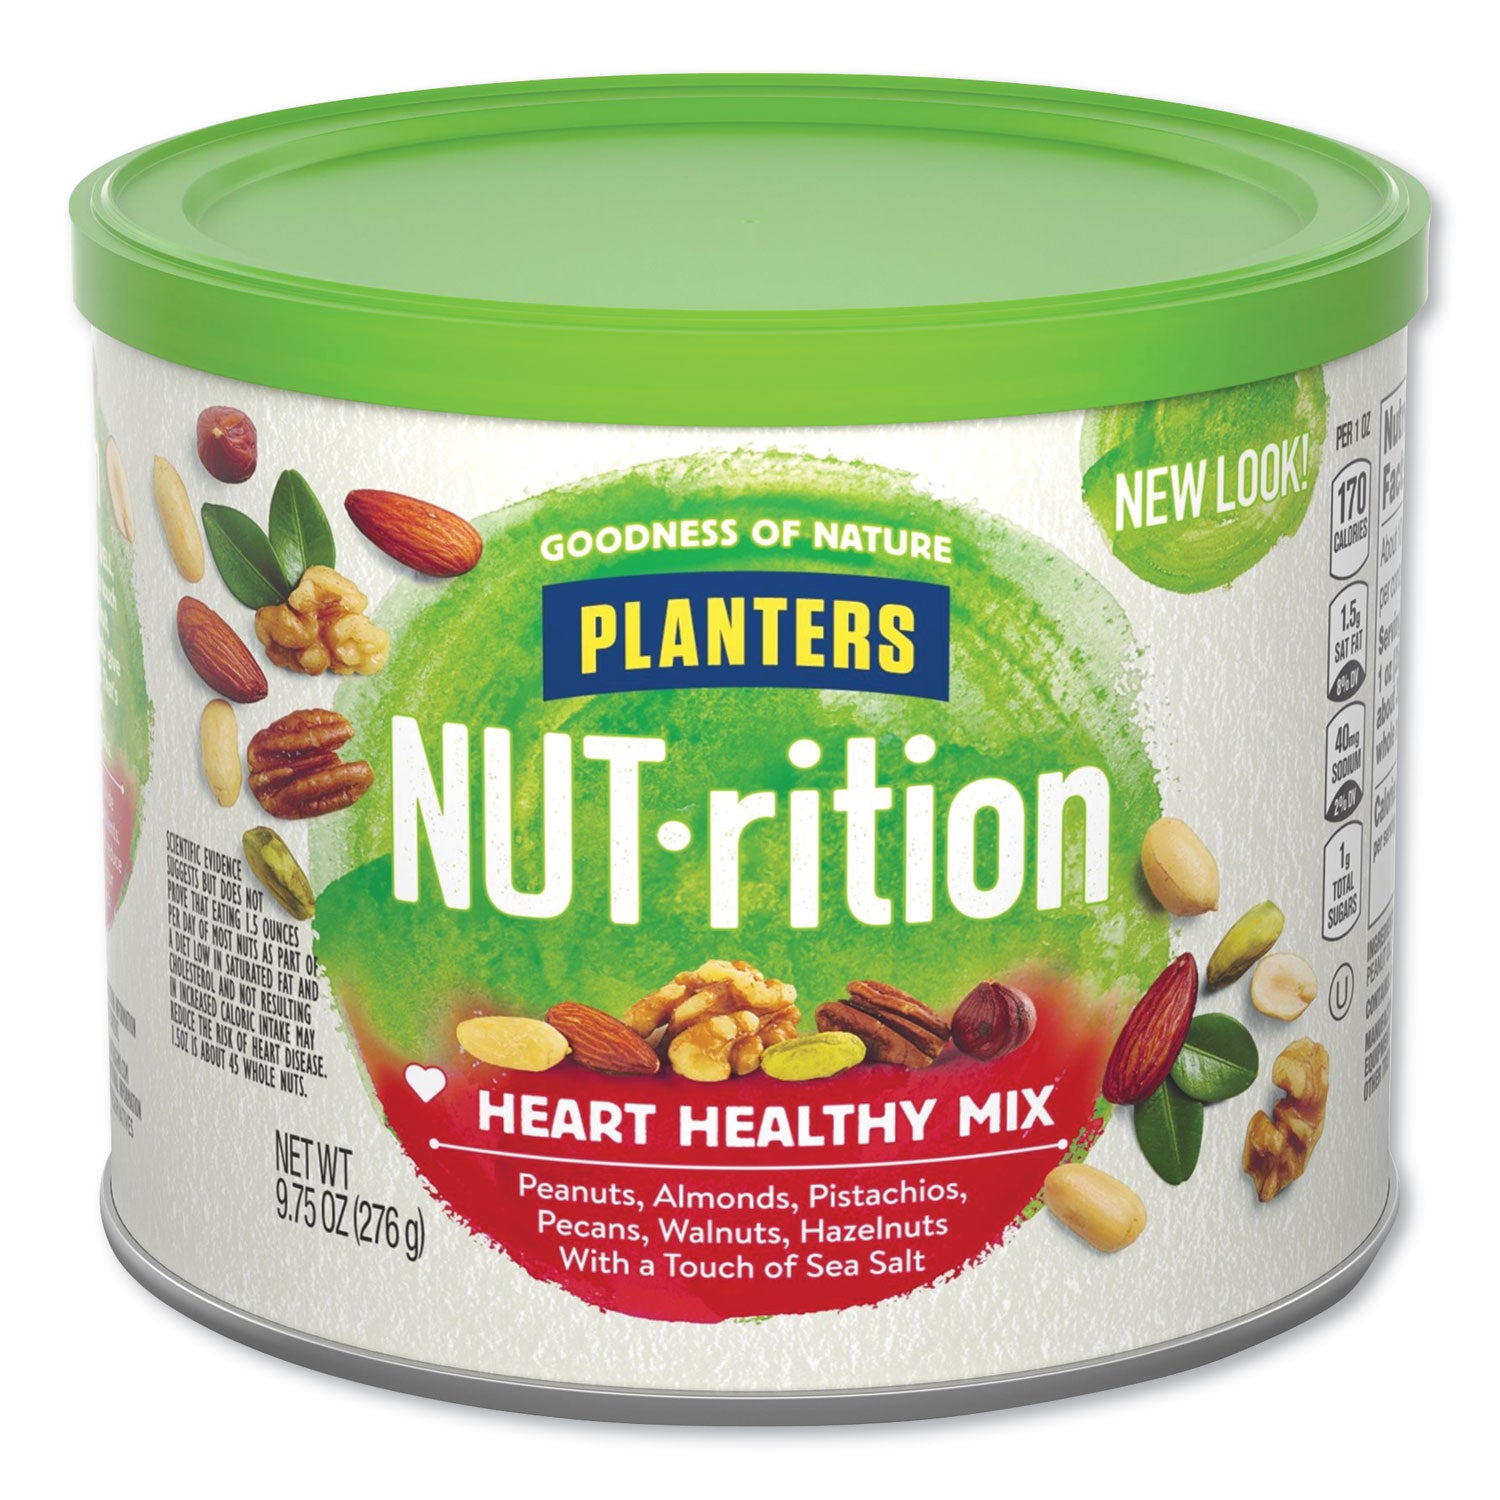 nut-rition-heart-healthy-mix-975-oz-can_ptn05957 - 2